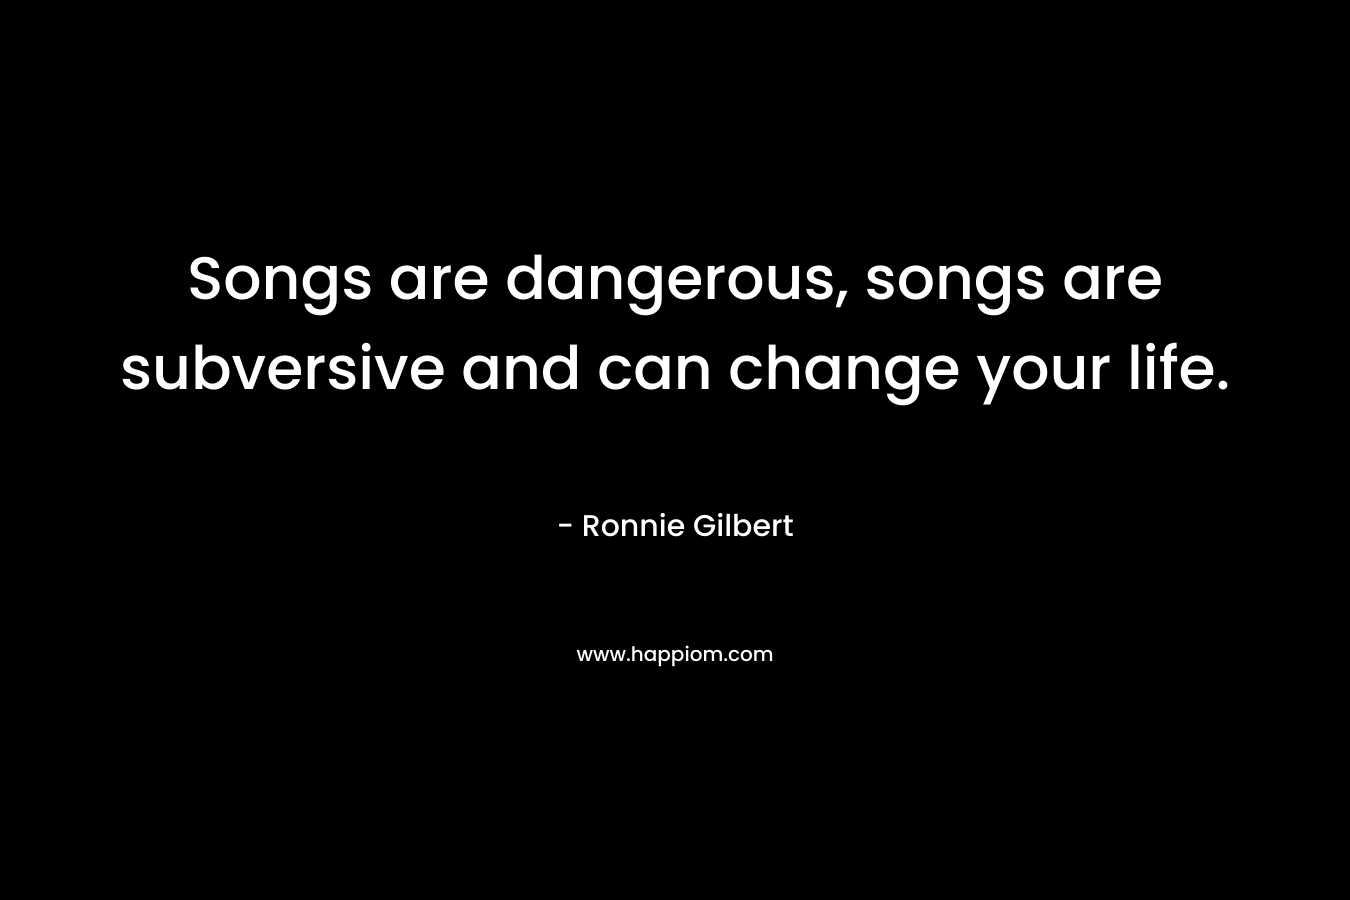 Songs are dangerous, songs are subversive and can change your life.